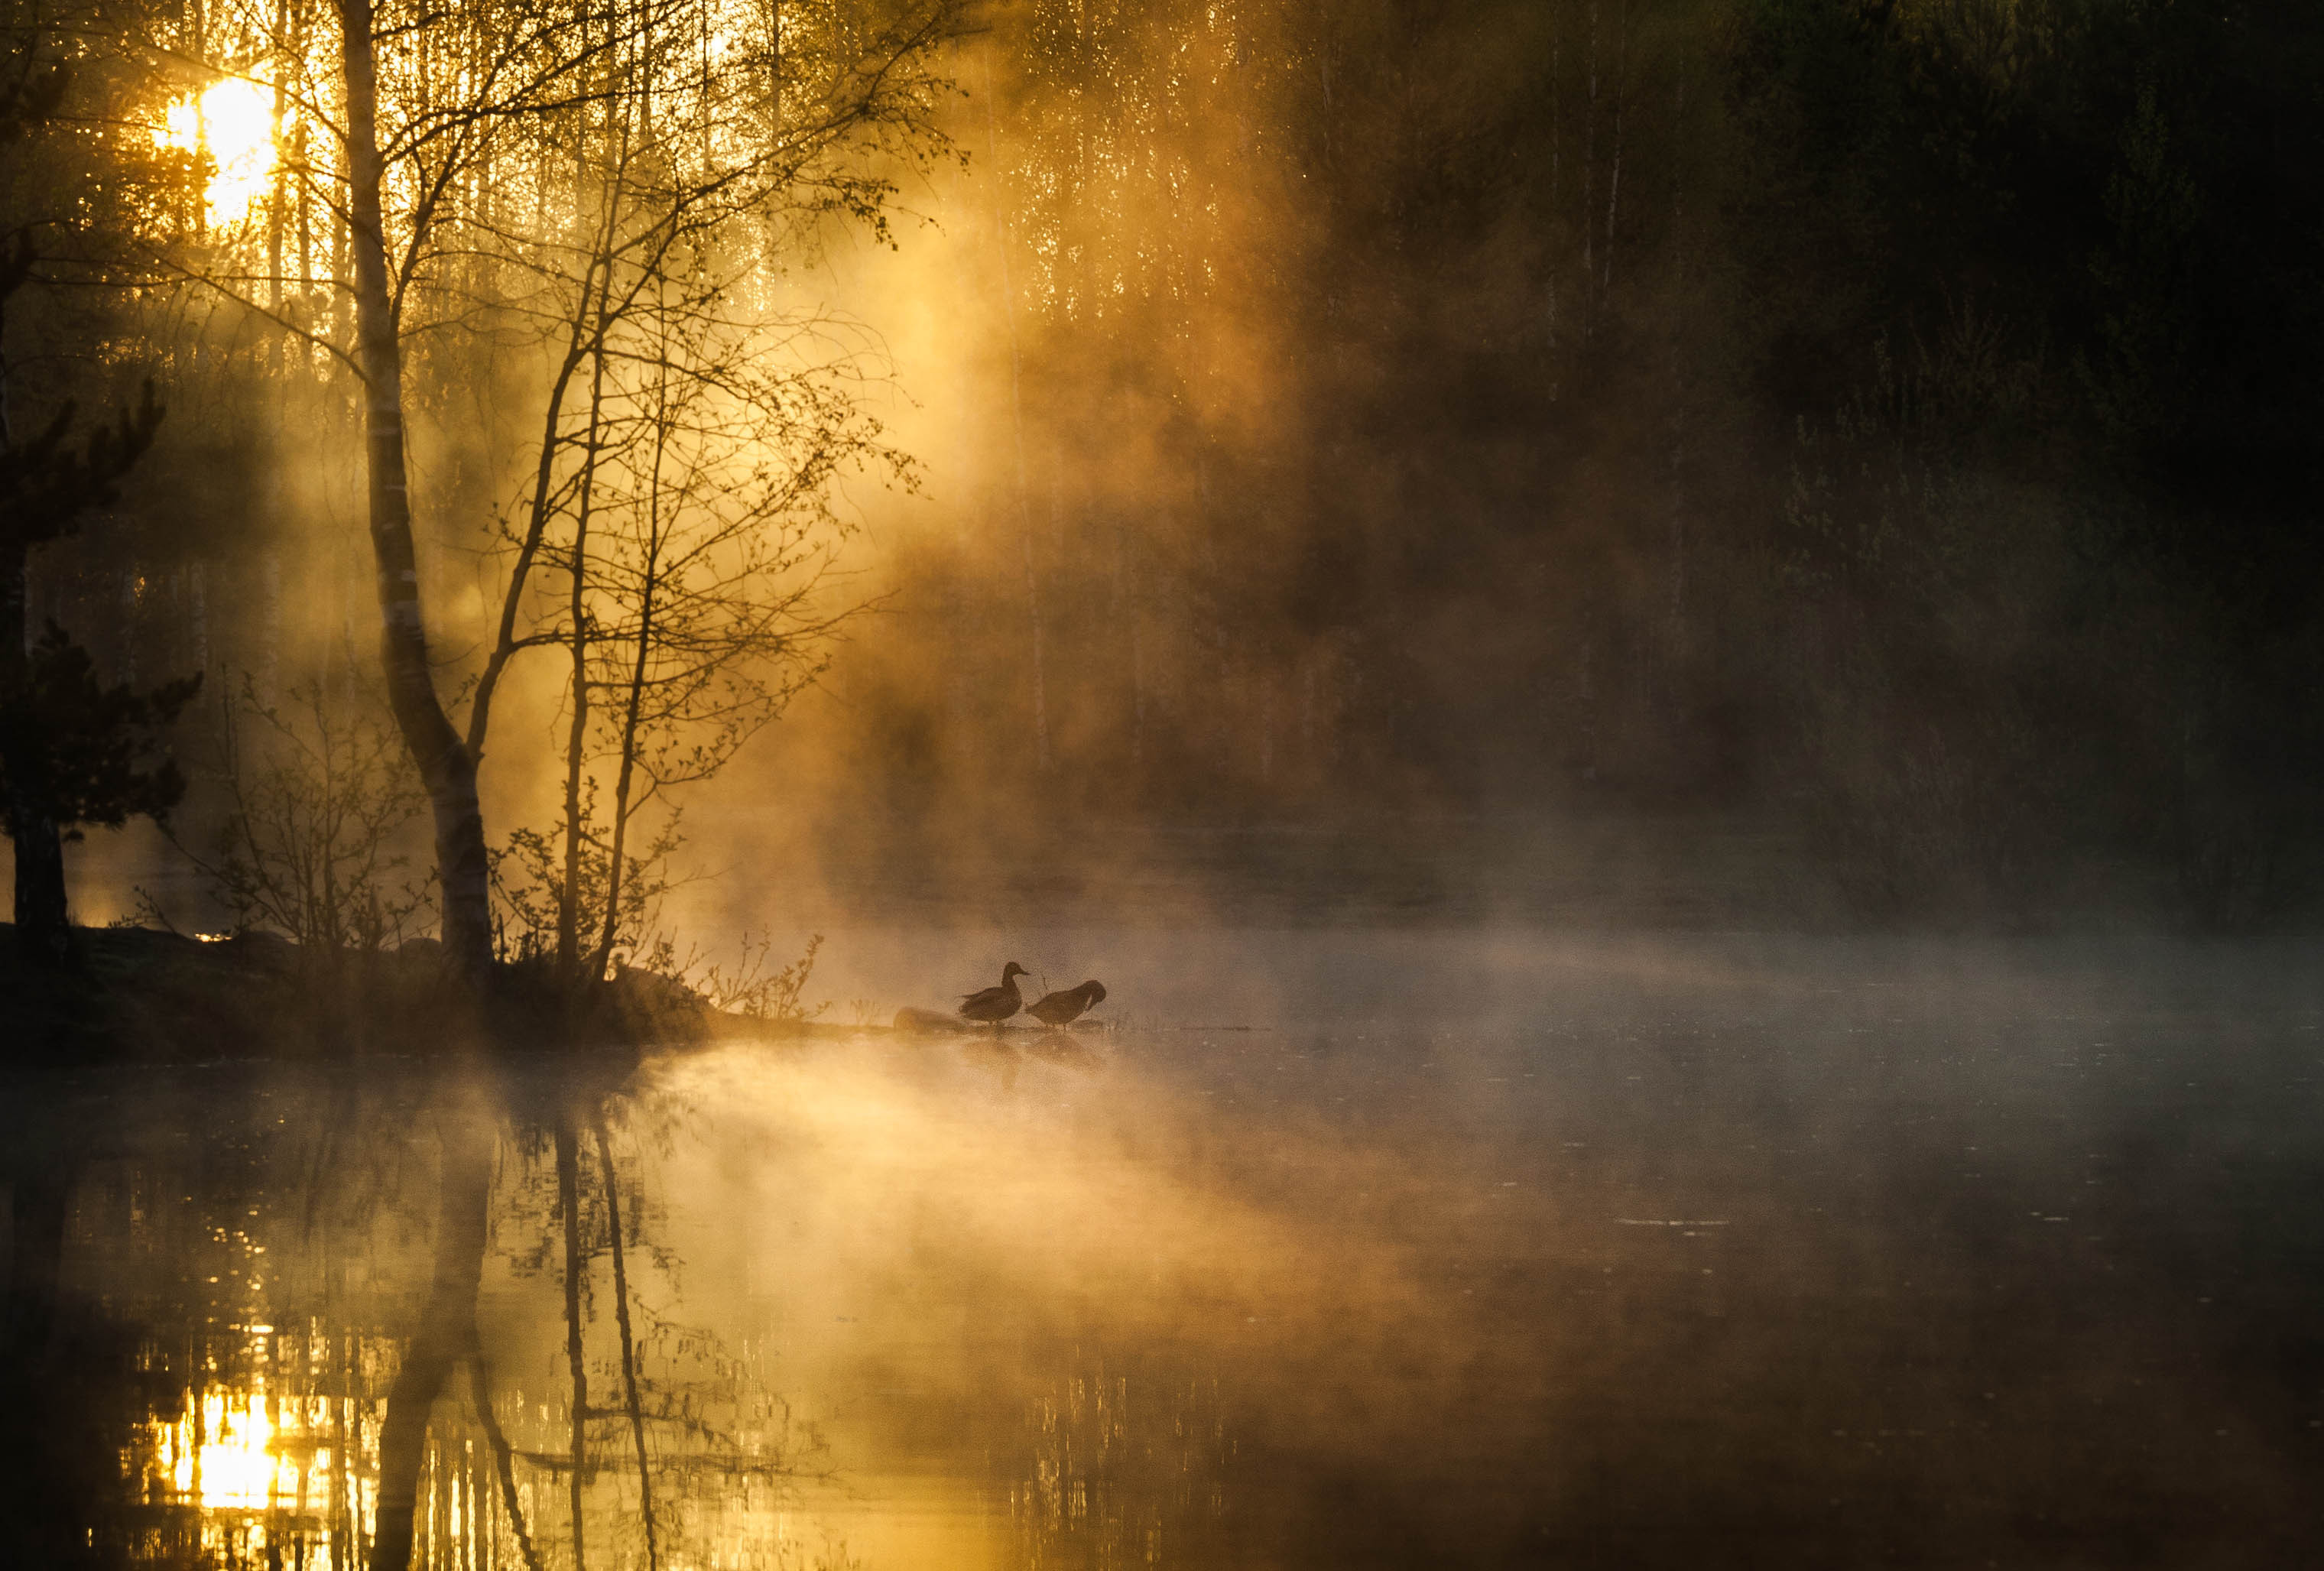 morning, Mist, Birds, Forest, River, Sunrise, Trees, Autumn Wallpapers HD /  Desktop and Mobile Backgrounds